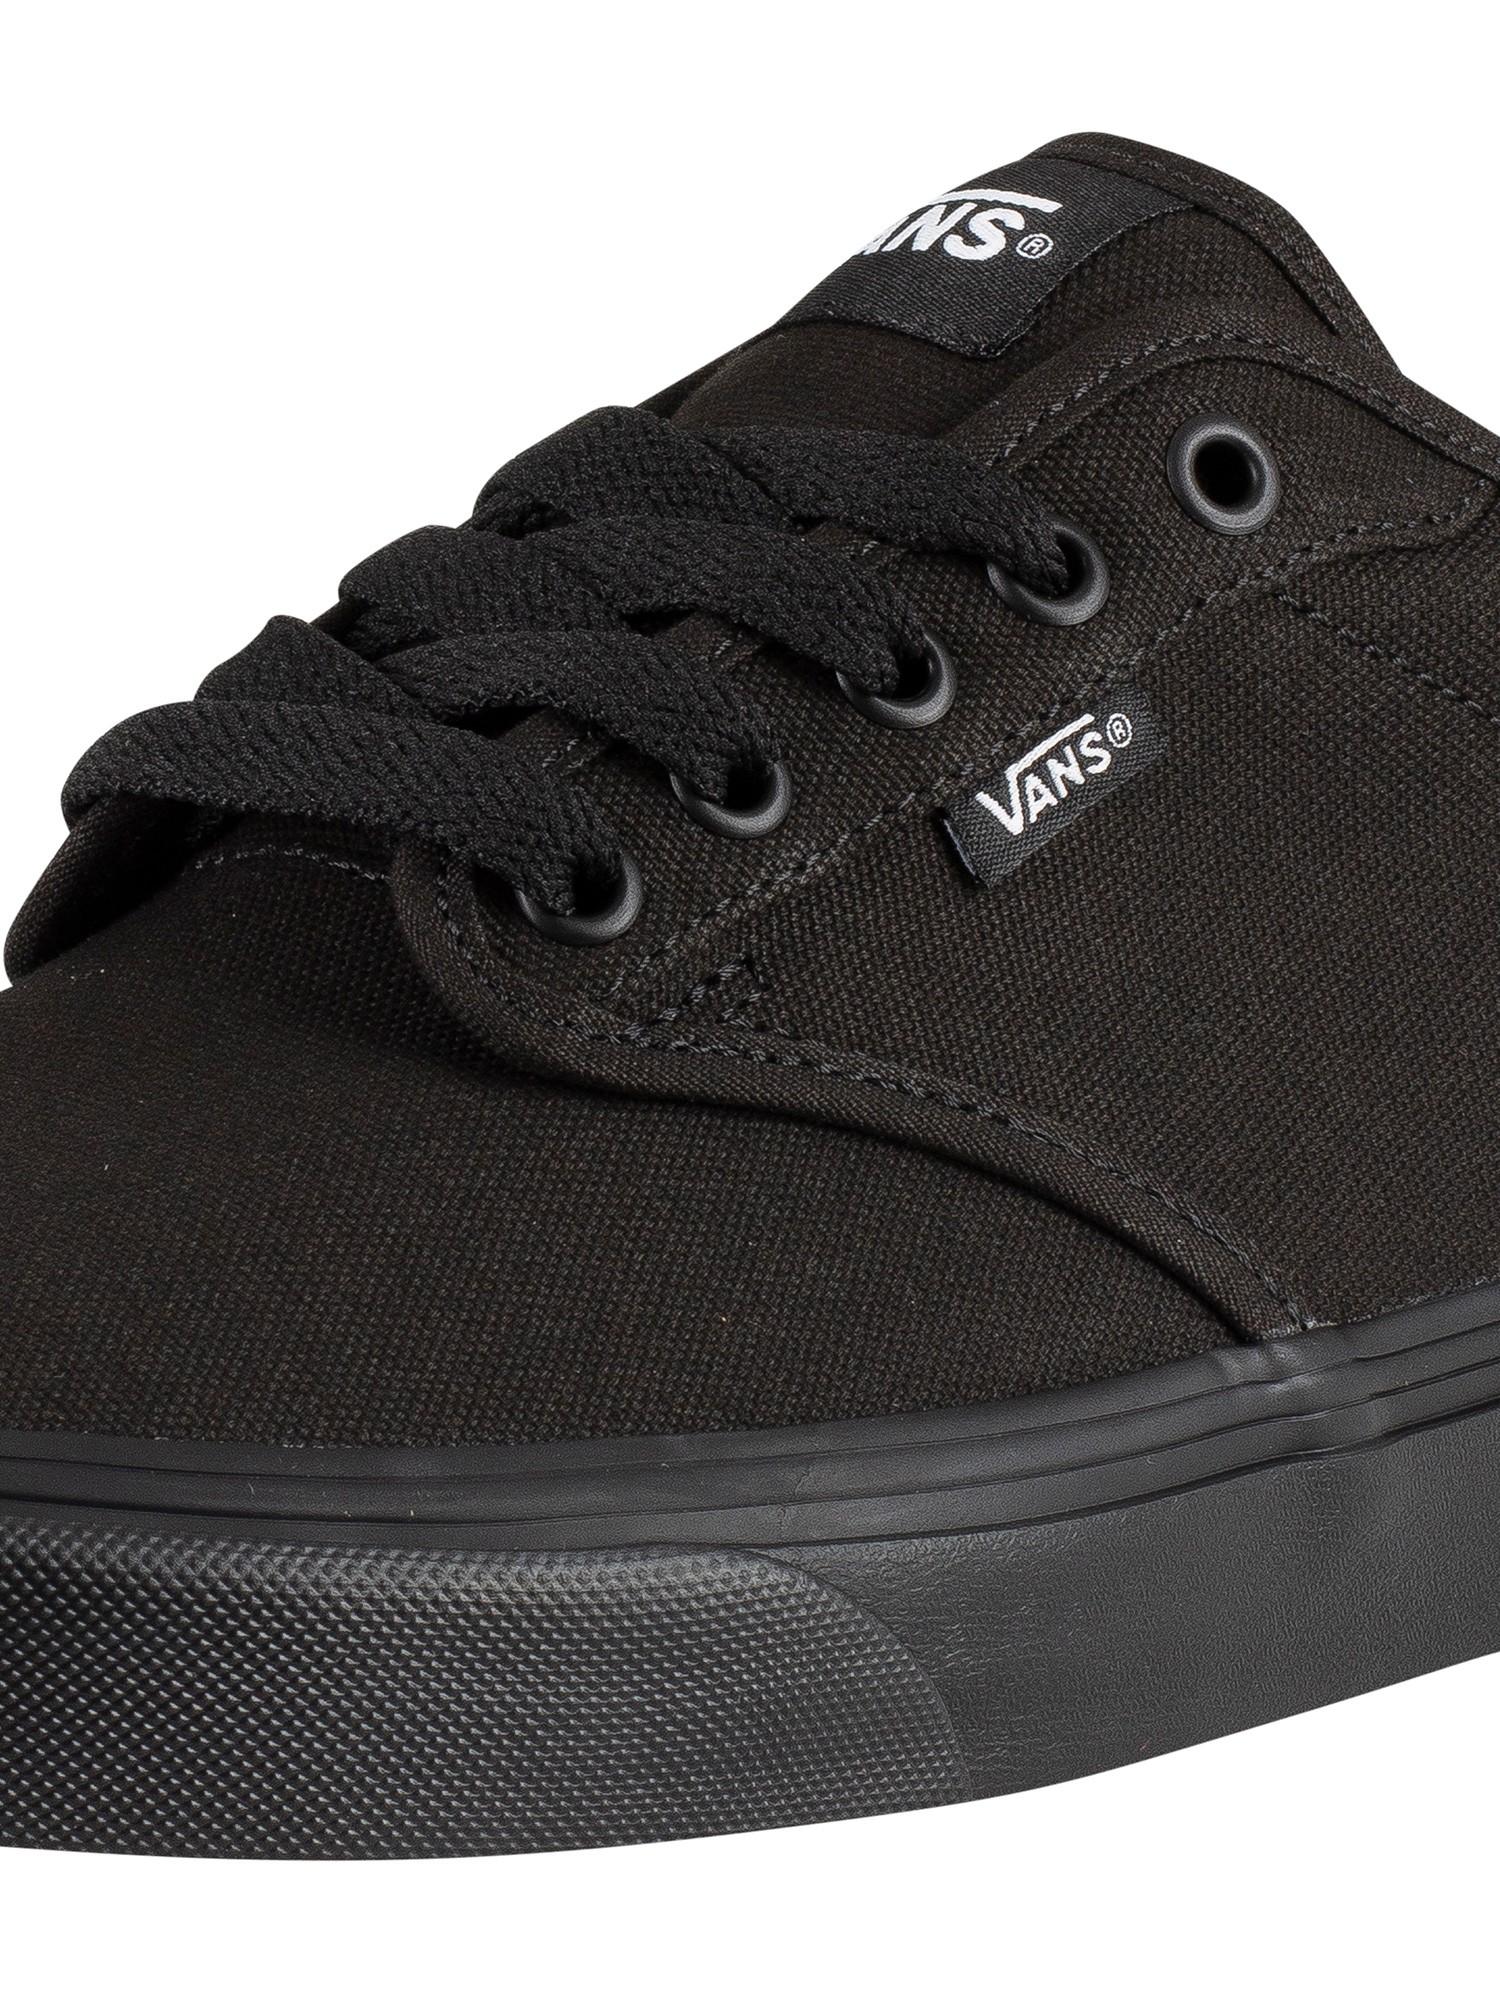 Vans Atwood Canvas Trainers in Black for Men | Lyst